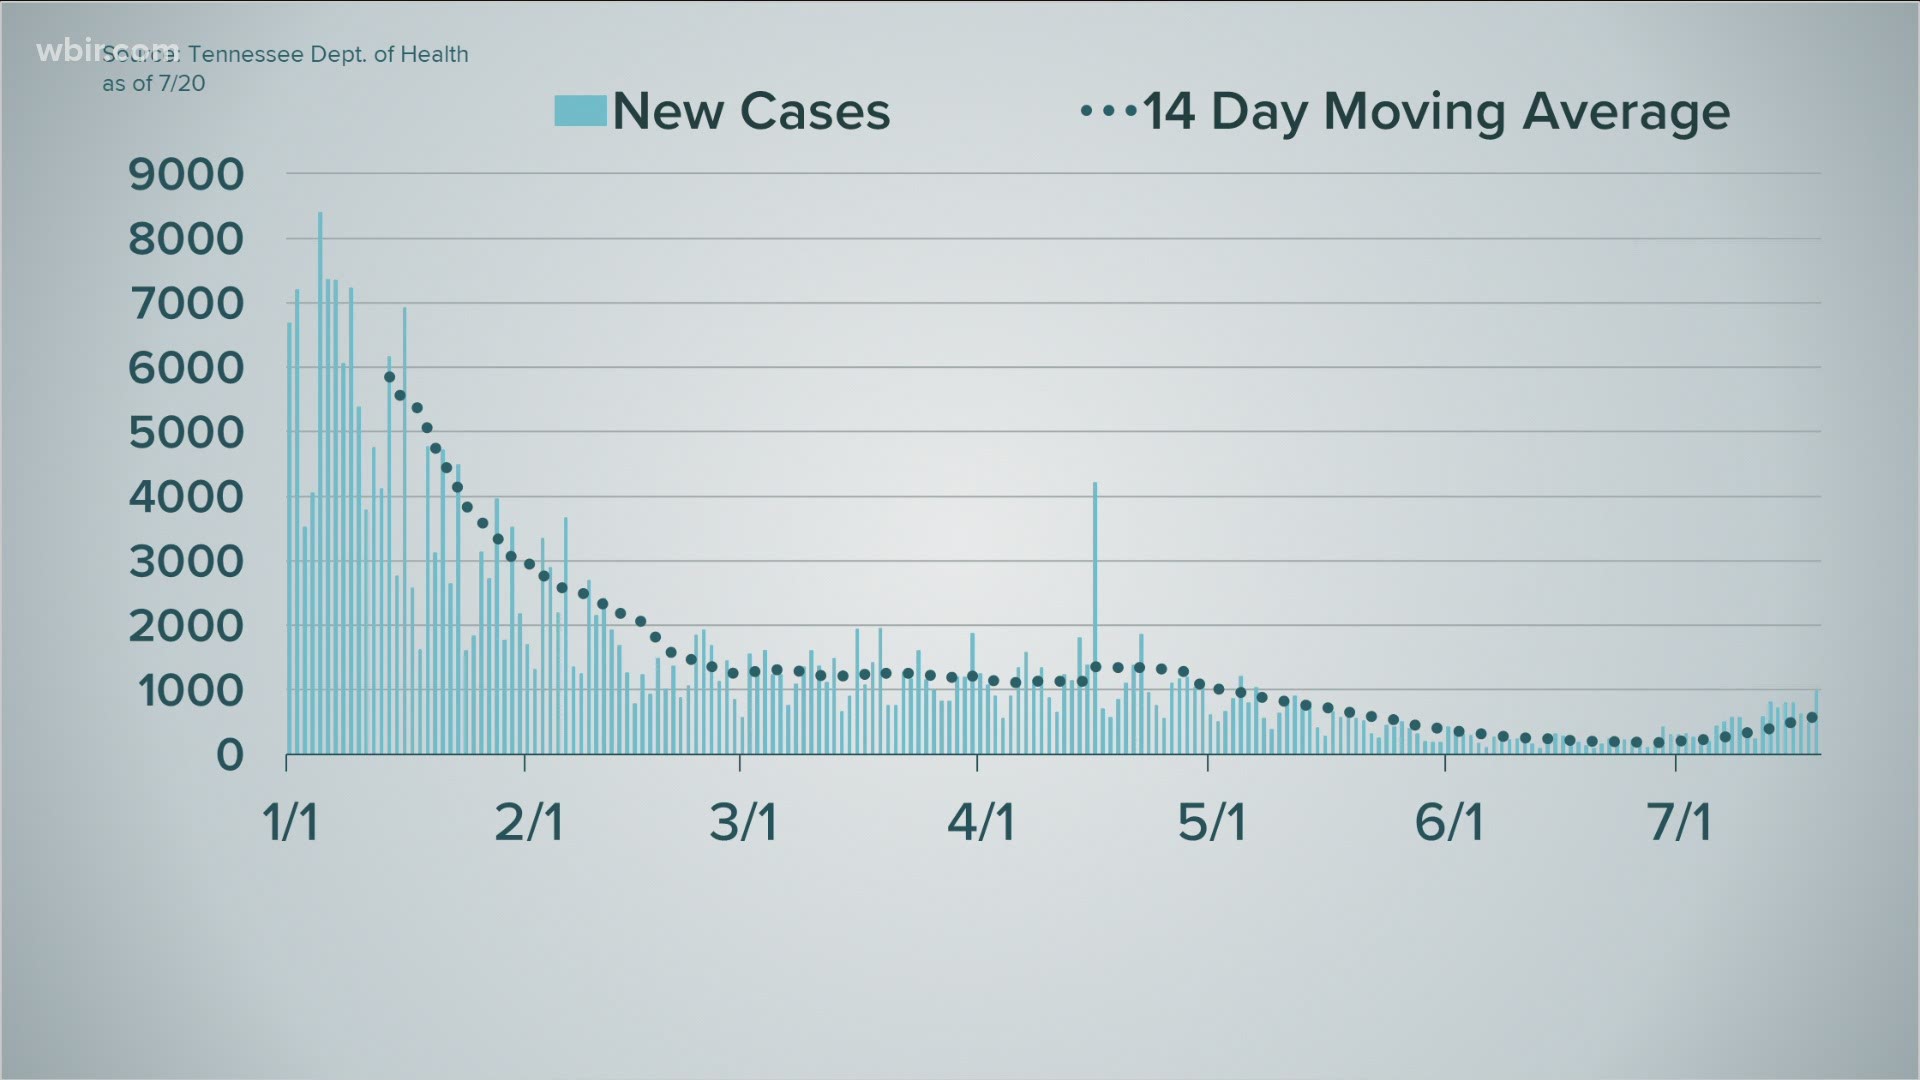 On Tuesday, July 20, 2021, the state reported just under 1,000 new cases. The most reported since early May.